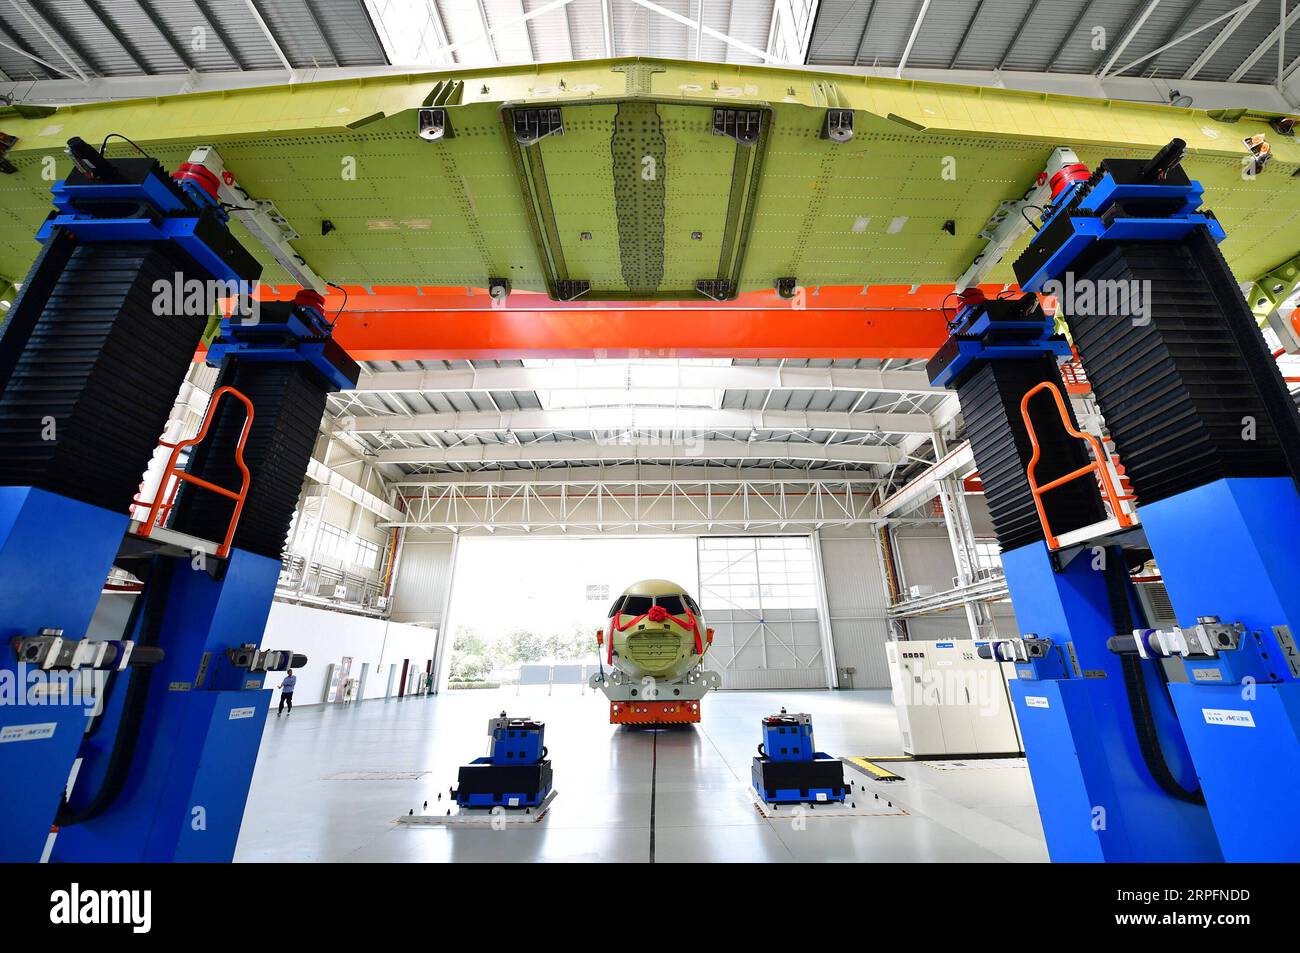 190928 -- BEIJING, Sept. 28, 2019 -- Engineers make preparations to join the wings with the fuselage of a Xinzhou-700 short-haul aircraft, manufactured by the Xi an Aircraft Industry Company XAC of the Aviation Industry Corporation of China, in Xi an, northwest China s Shaanxi Province, Sept. 27, 2019.  XINHUA PHOTOS OF THE DAY ShaoxRui PUBLICATIONxNOTxINxCHN Stock Photo